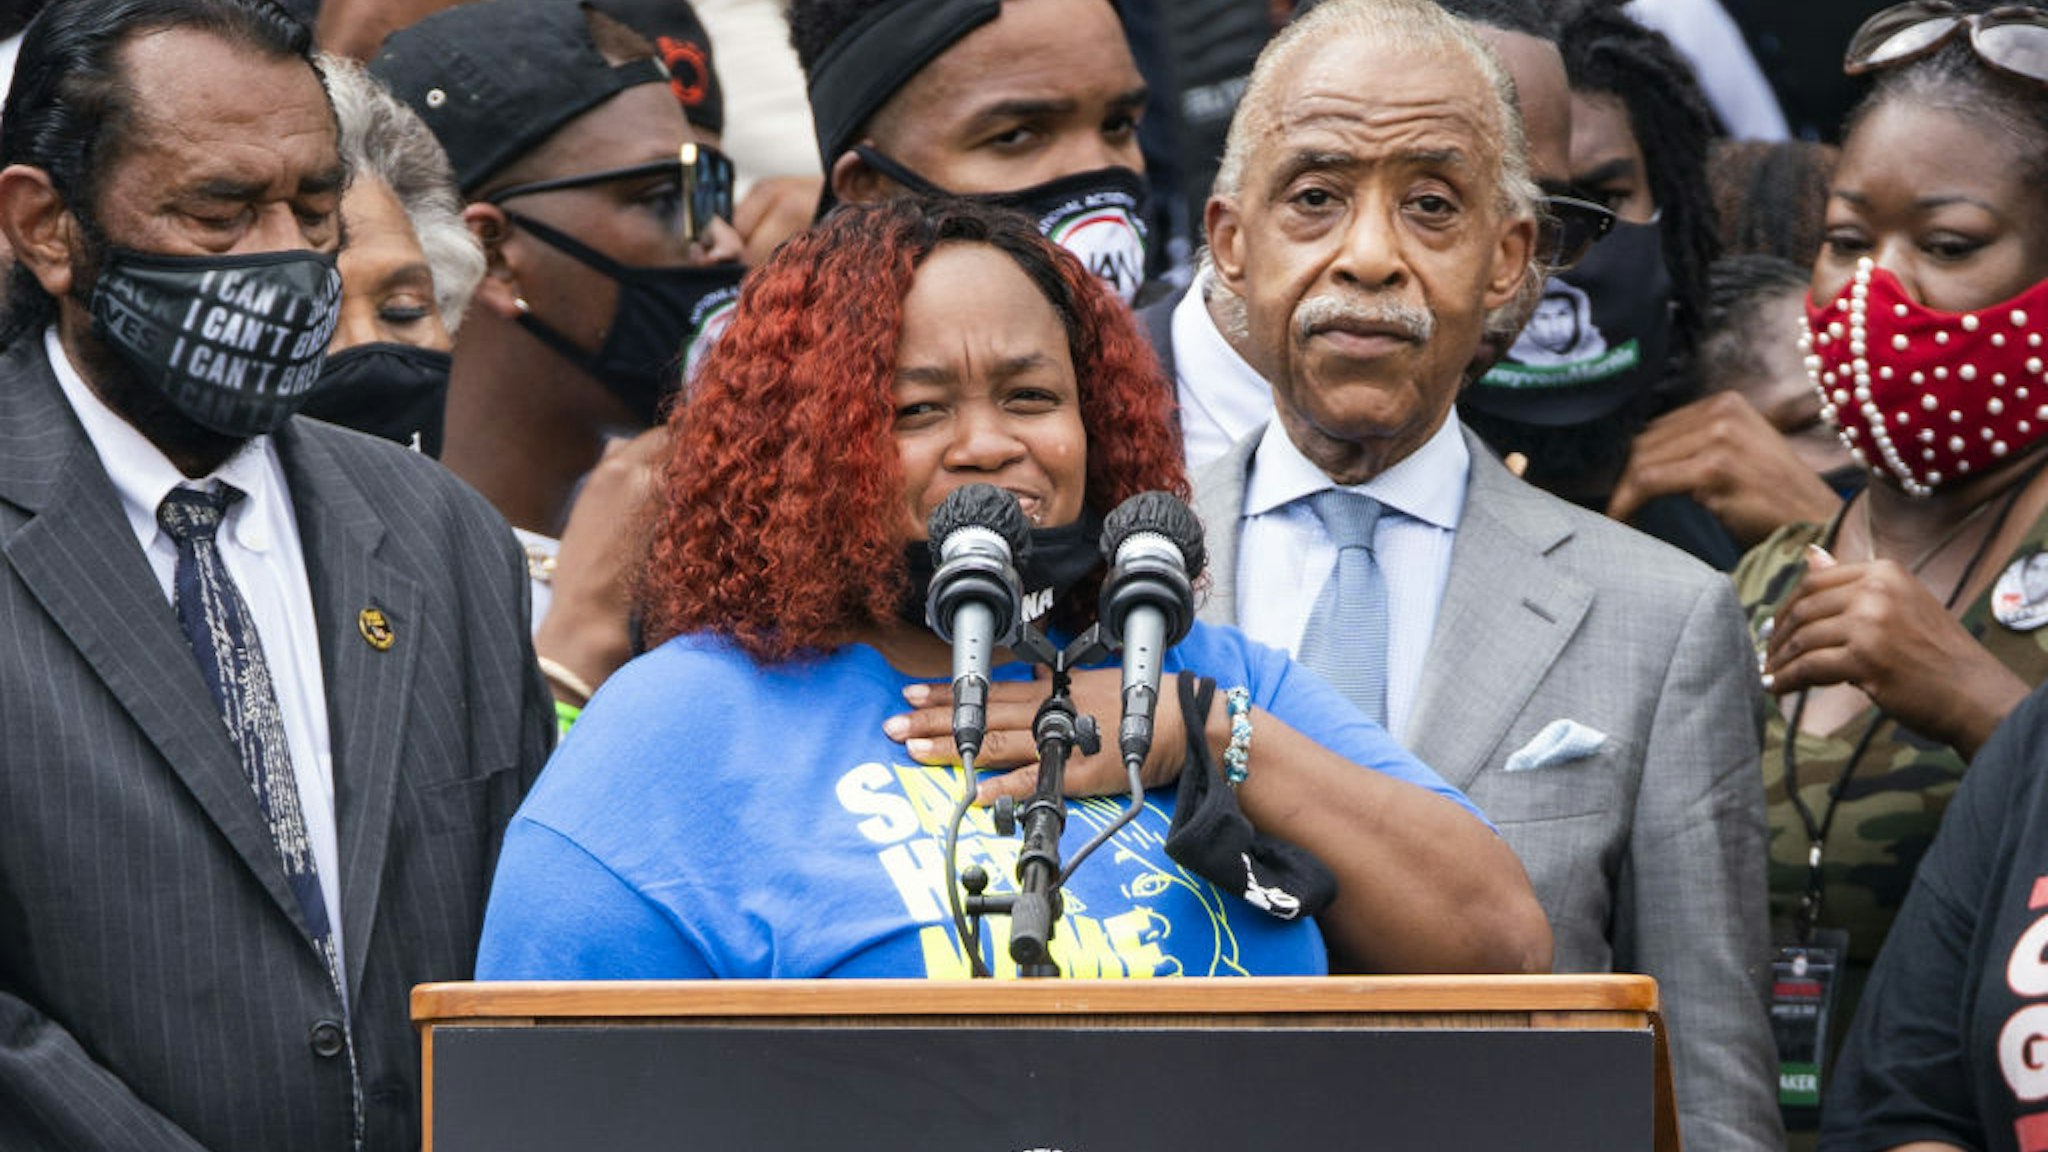 Tamika Palmer reacts while speaking about her daughter Breonna Taylor, who police shot in her apartment in Kentucky, during the "Get Your Knee Off Our Necks" March on Washington in Washington, D.C., U.S., on Friday, Aug. 28, 2020.